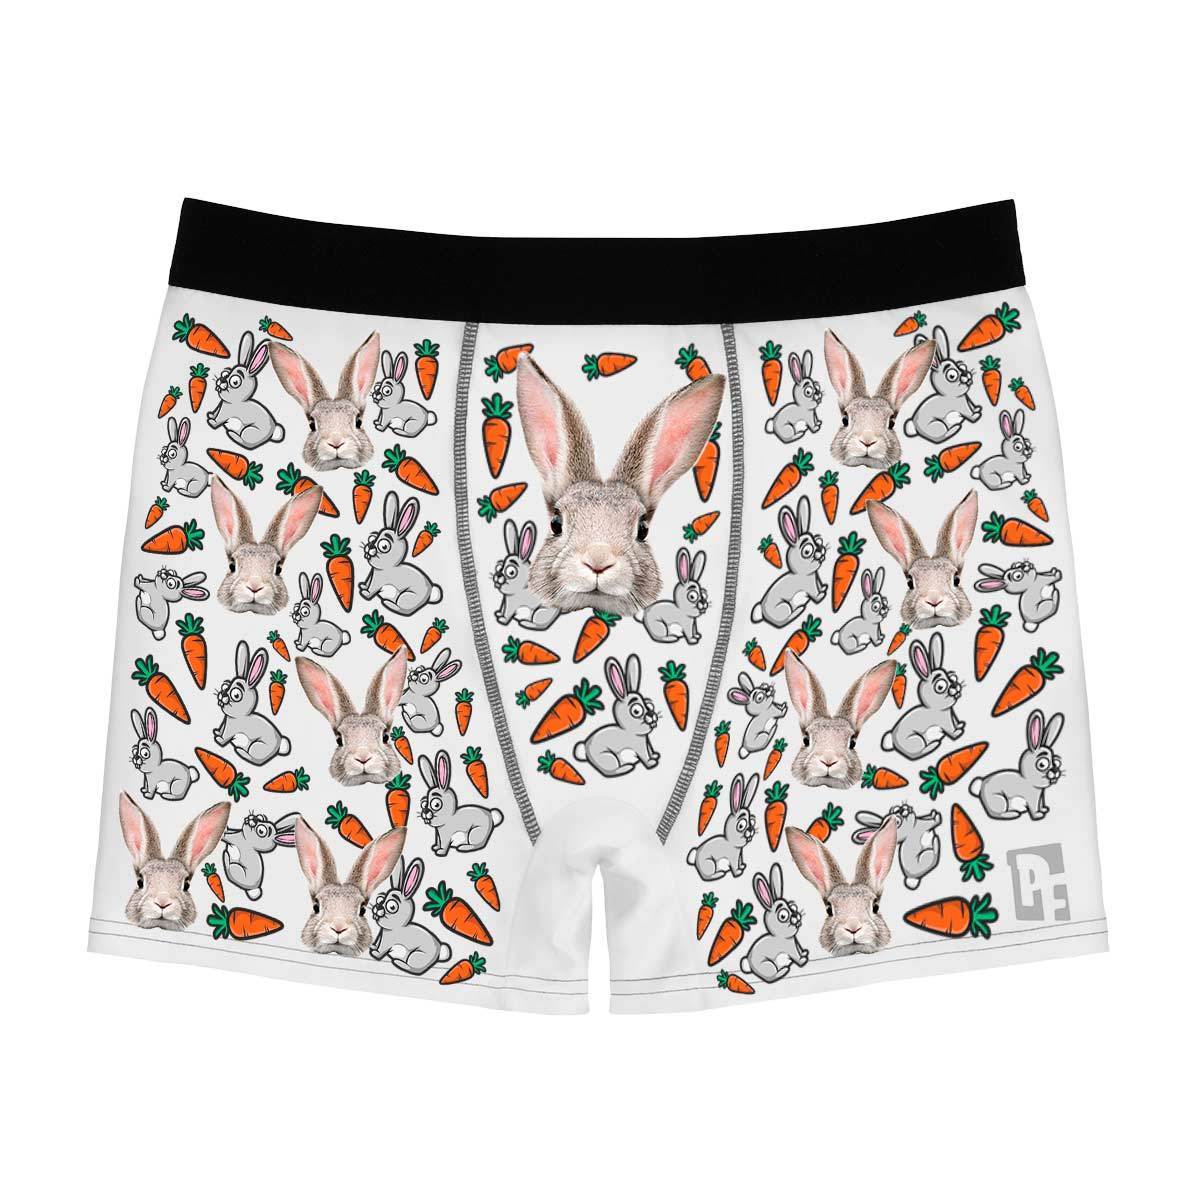 White Bunny men's boxer briefs personalized with photo printed on them